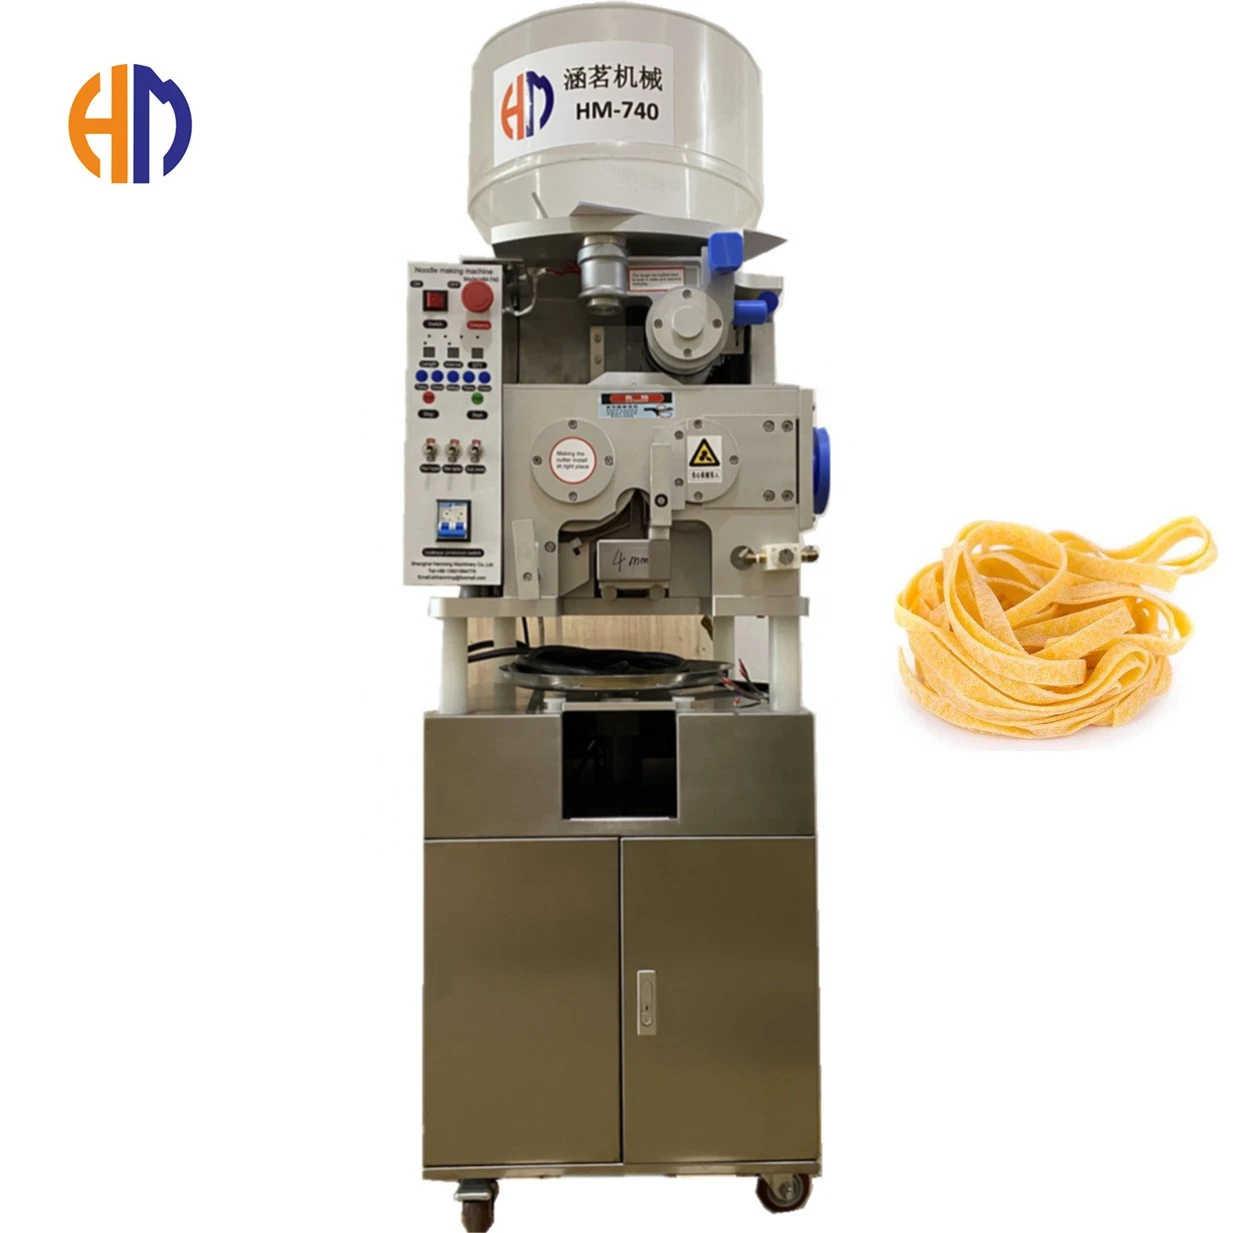 One button start Automatic intelligent ramen noodle making machine from Hanming factory